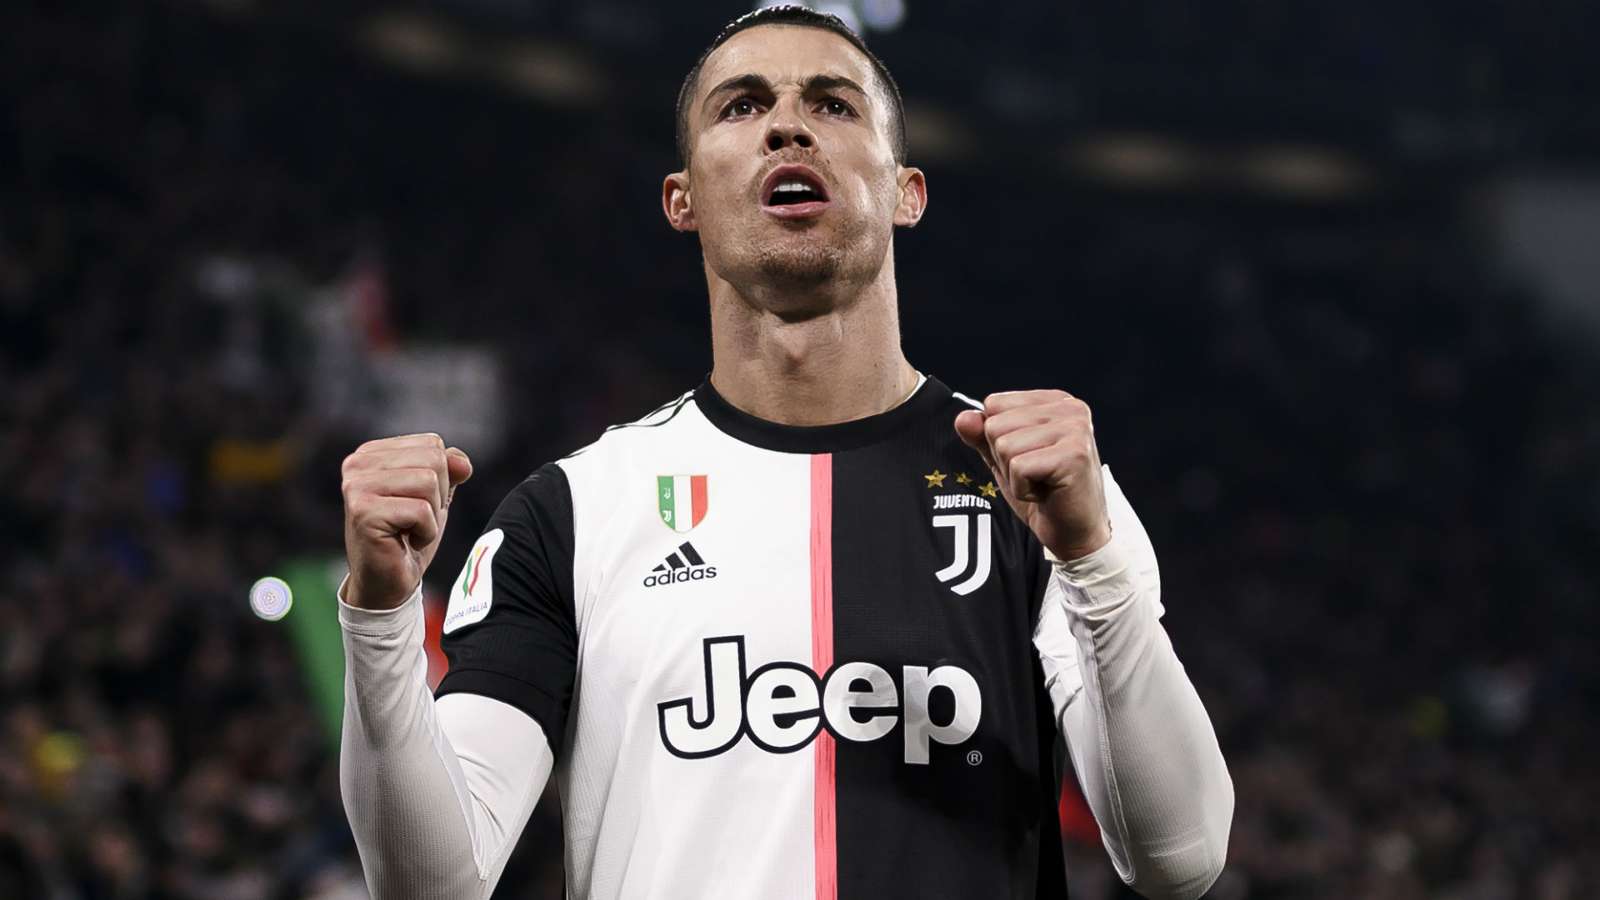 Juventus-Serie A-Italy-Portugal-پرتغال-سری آ-ایتالیا-یوونتوس